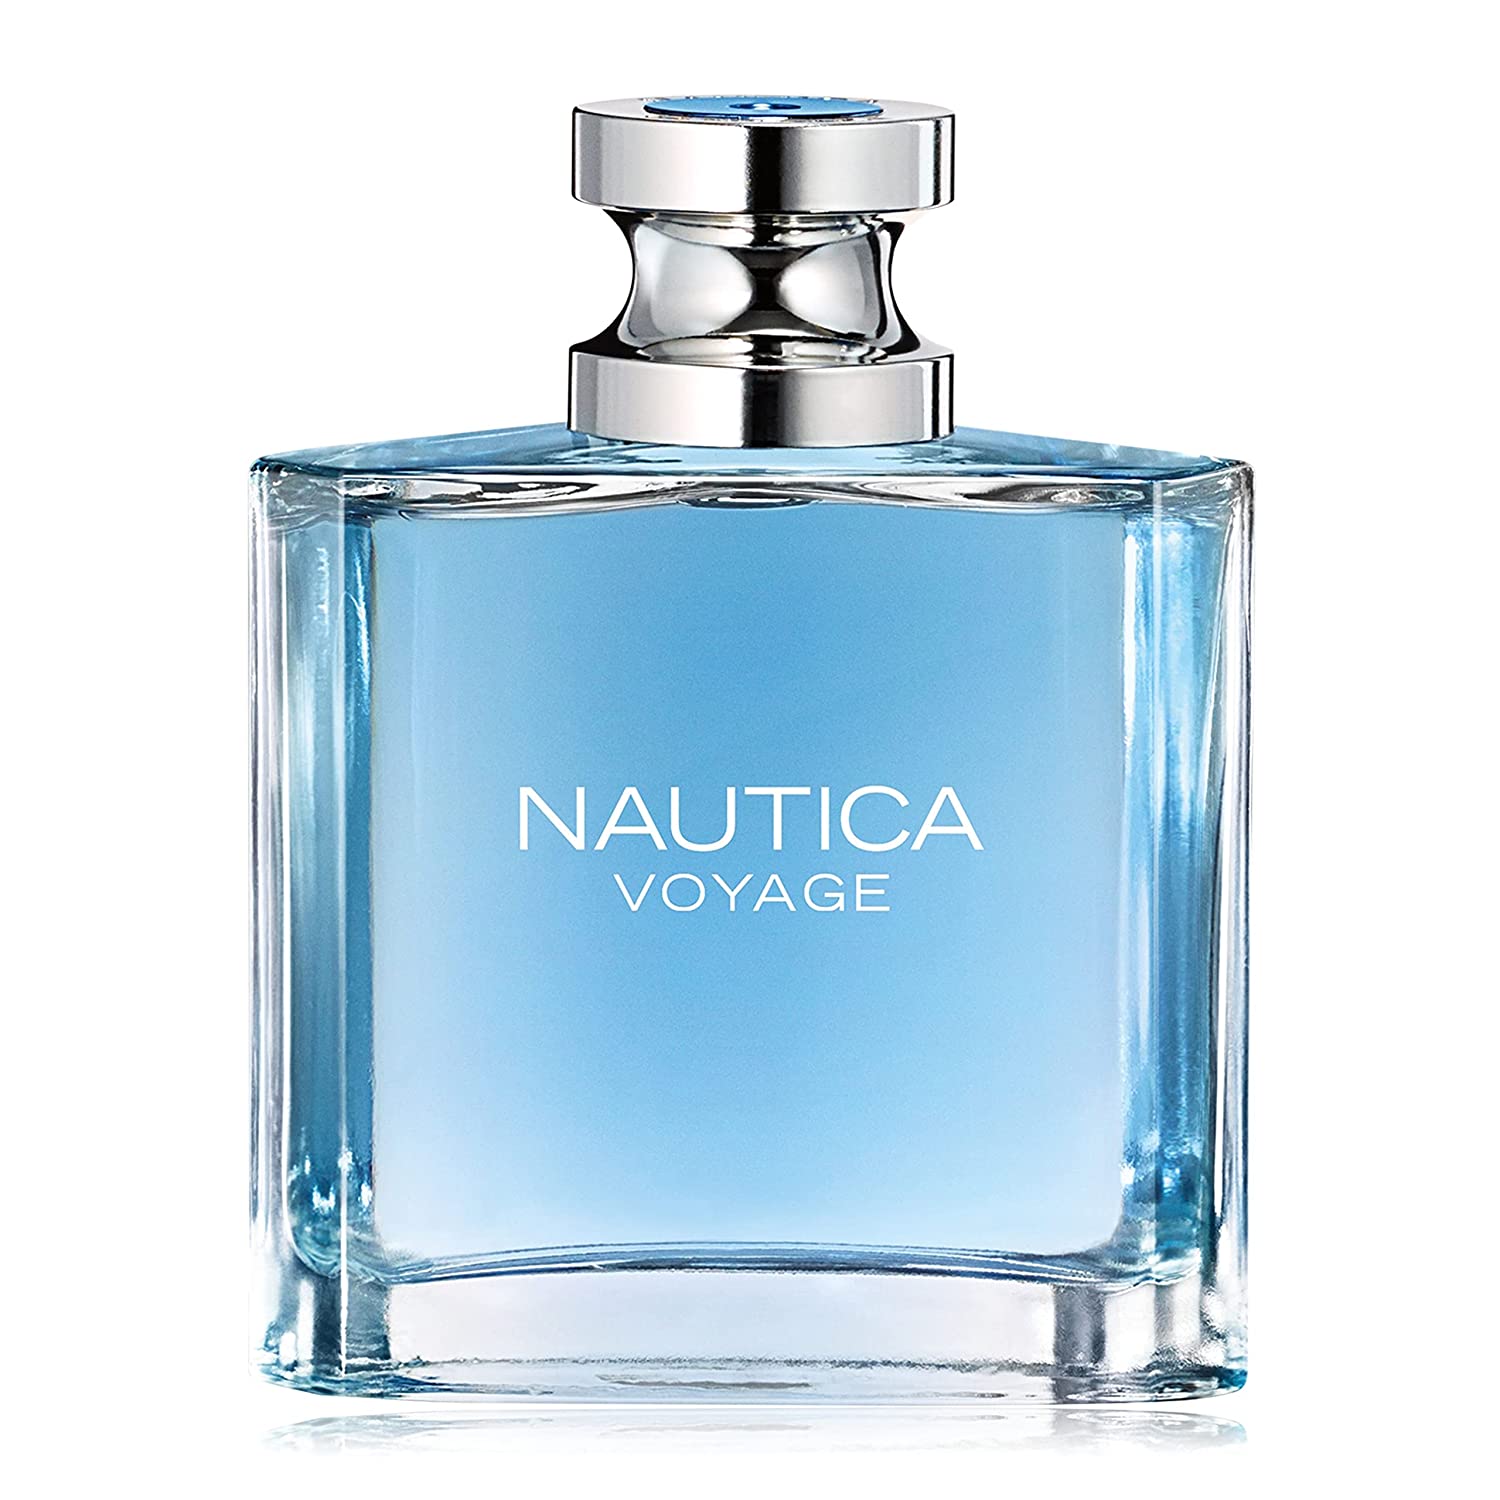 Nautica Voyage Eau De Toilette for Men 3.4oz/100ml $10.39 with Subscribe and Save YMMV